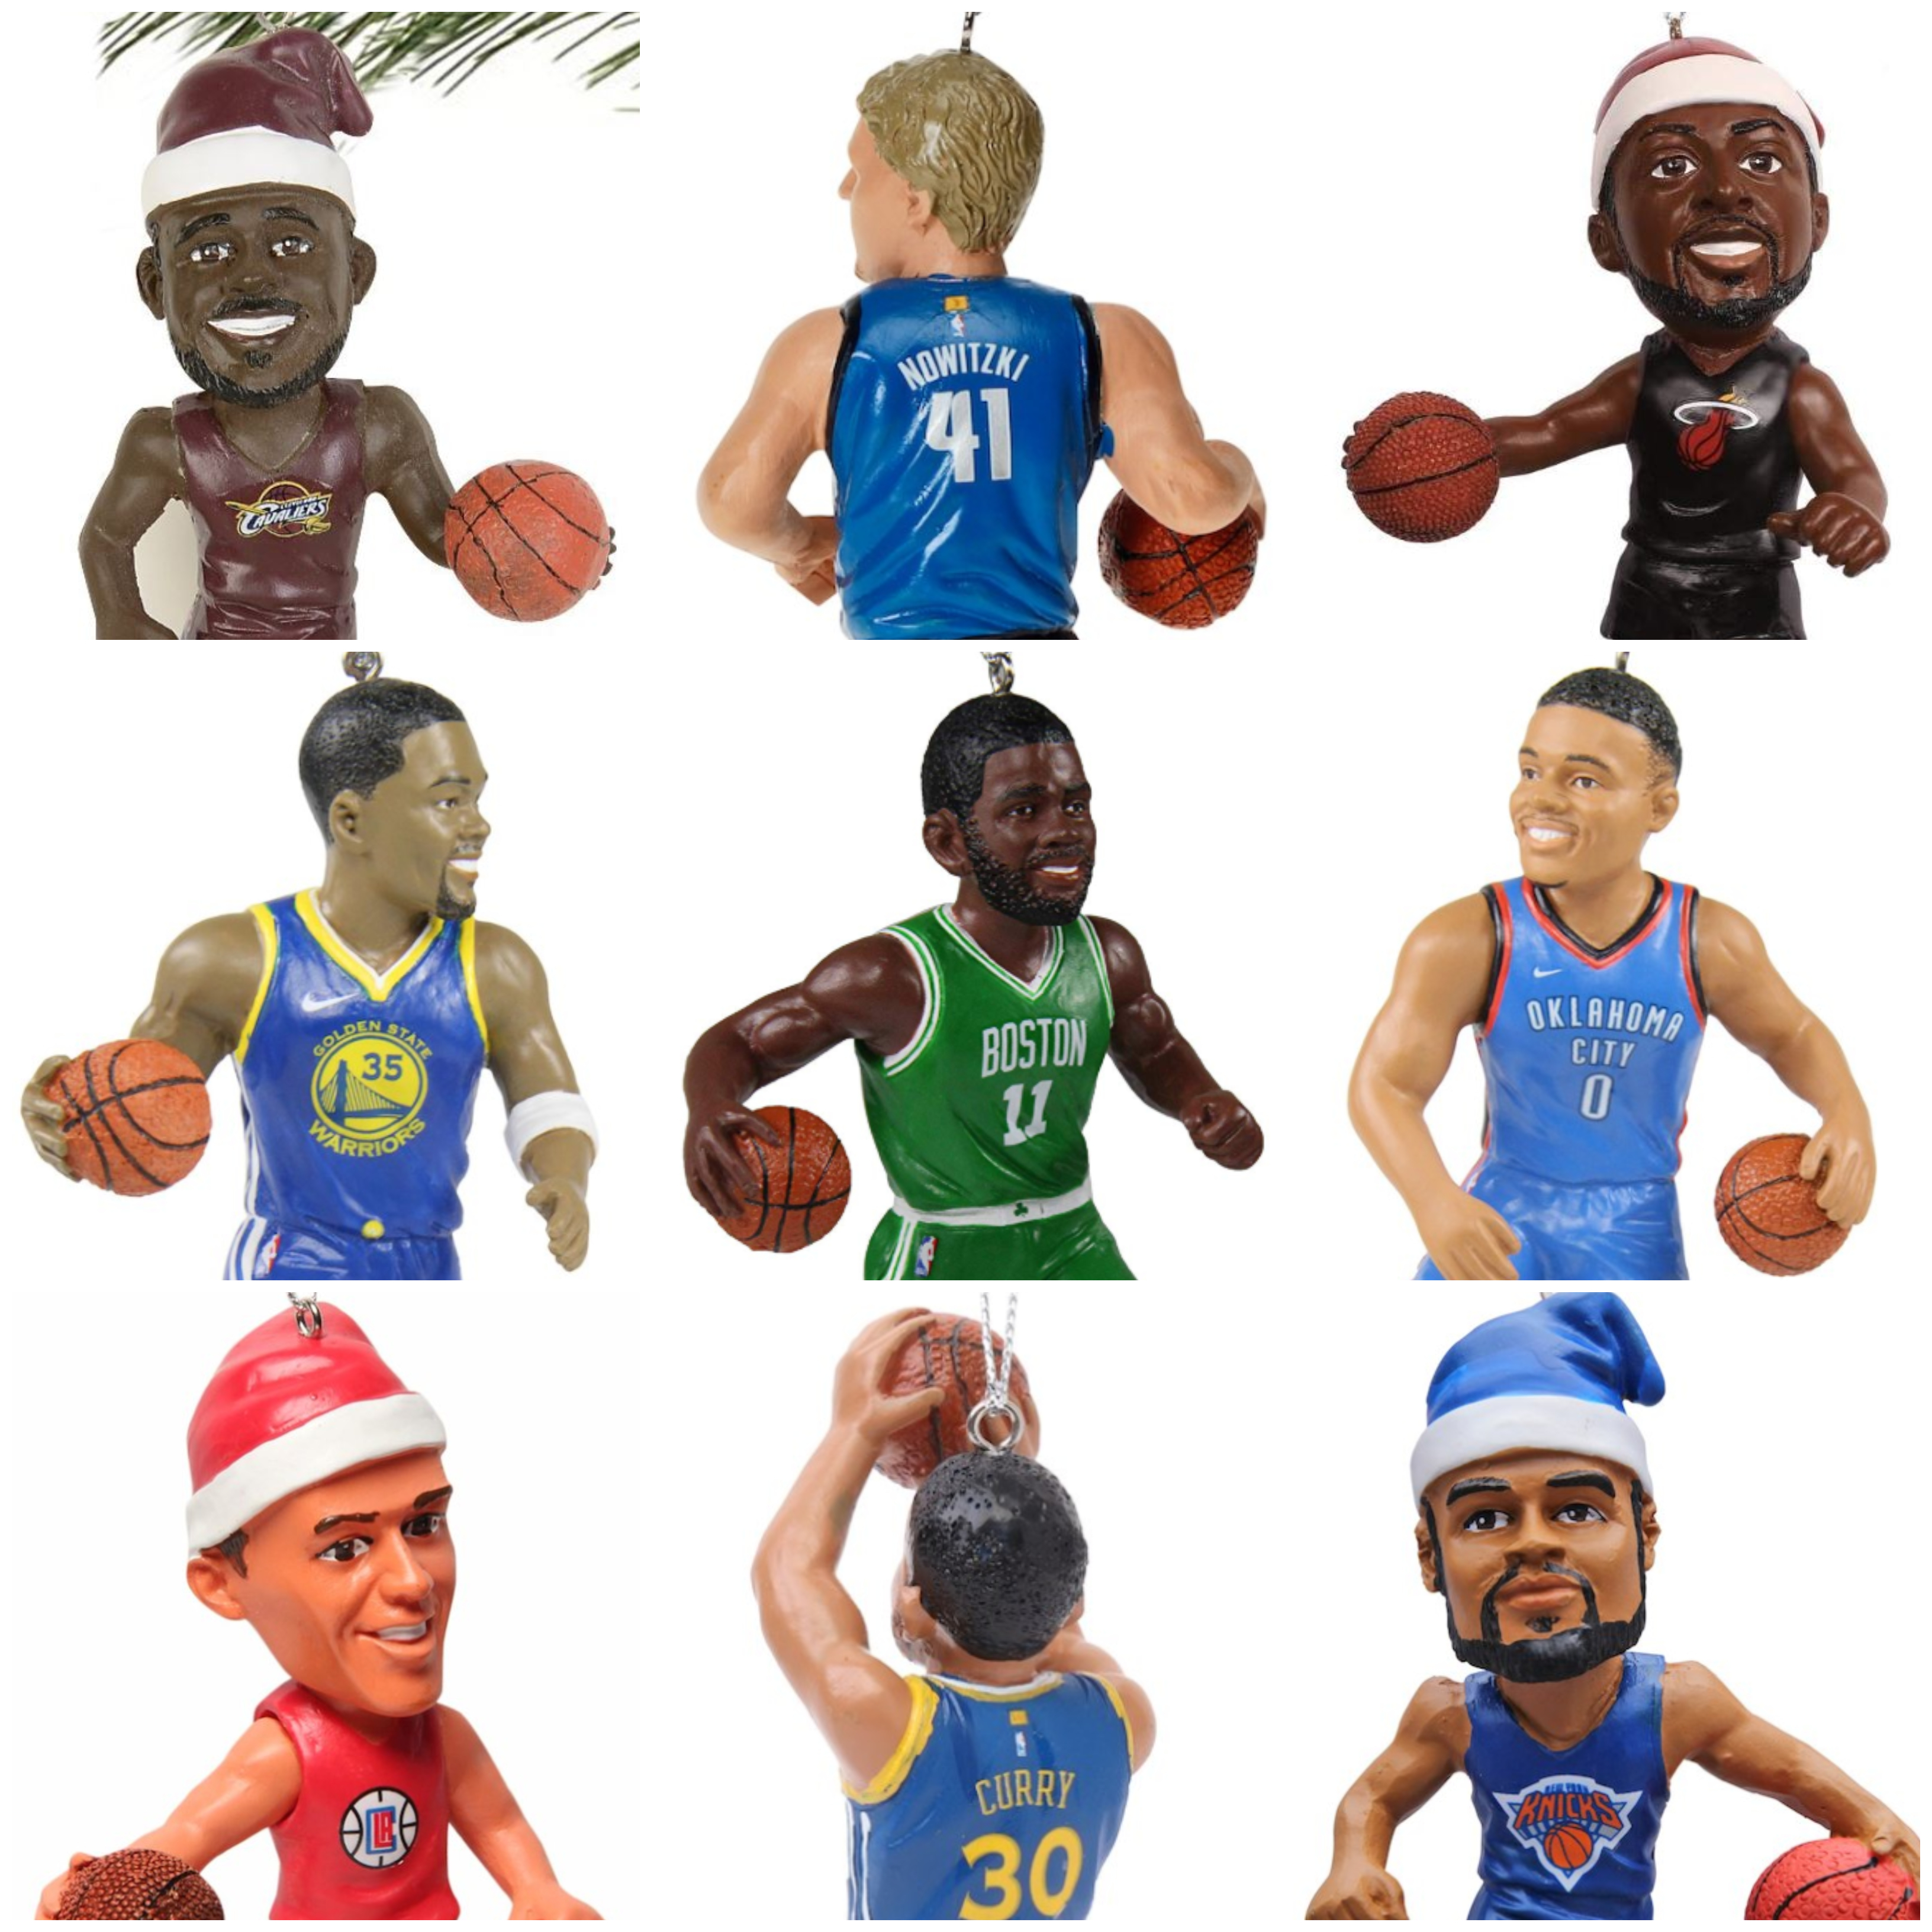 NBA player Christmas ornaments are the perfect stocking stuffer for NBA fanatics